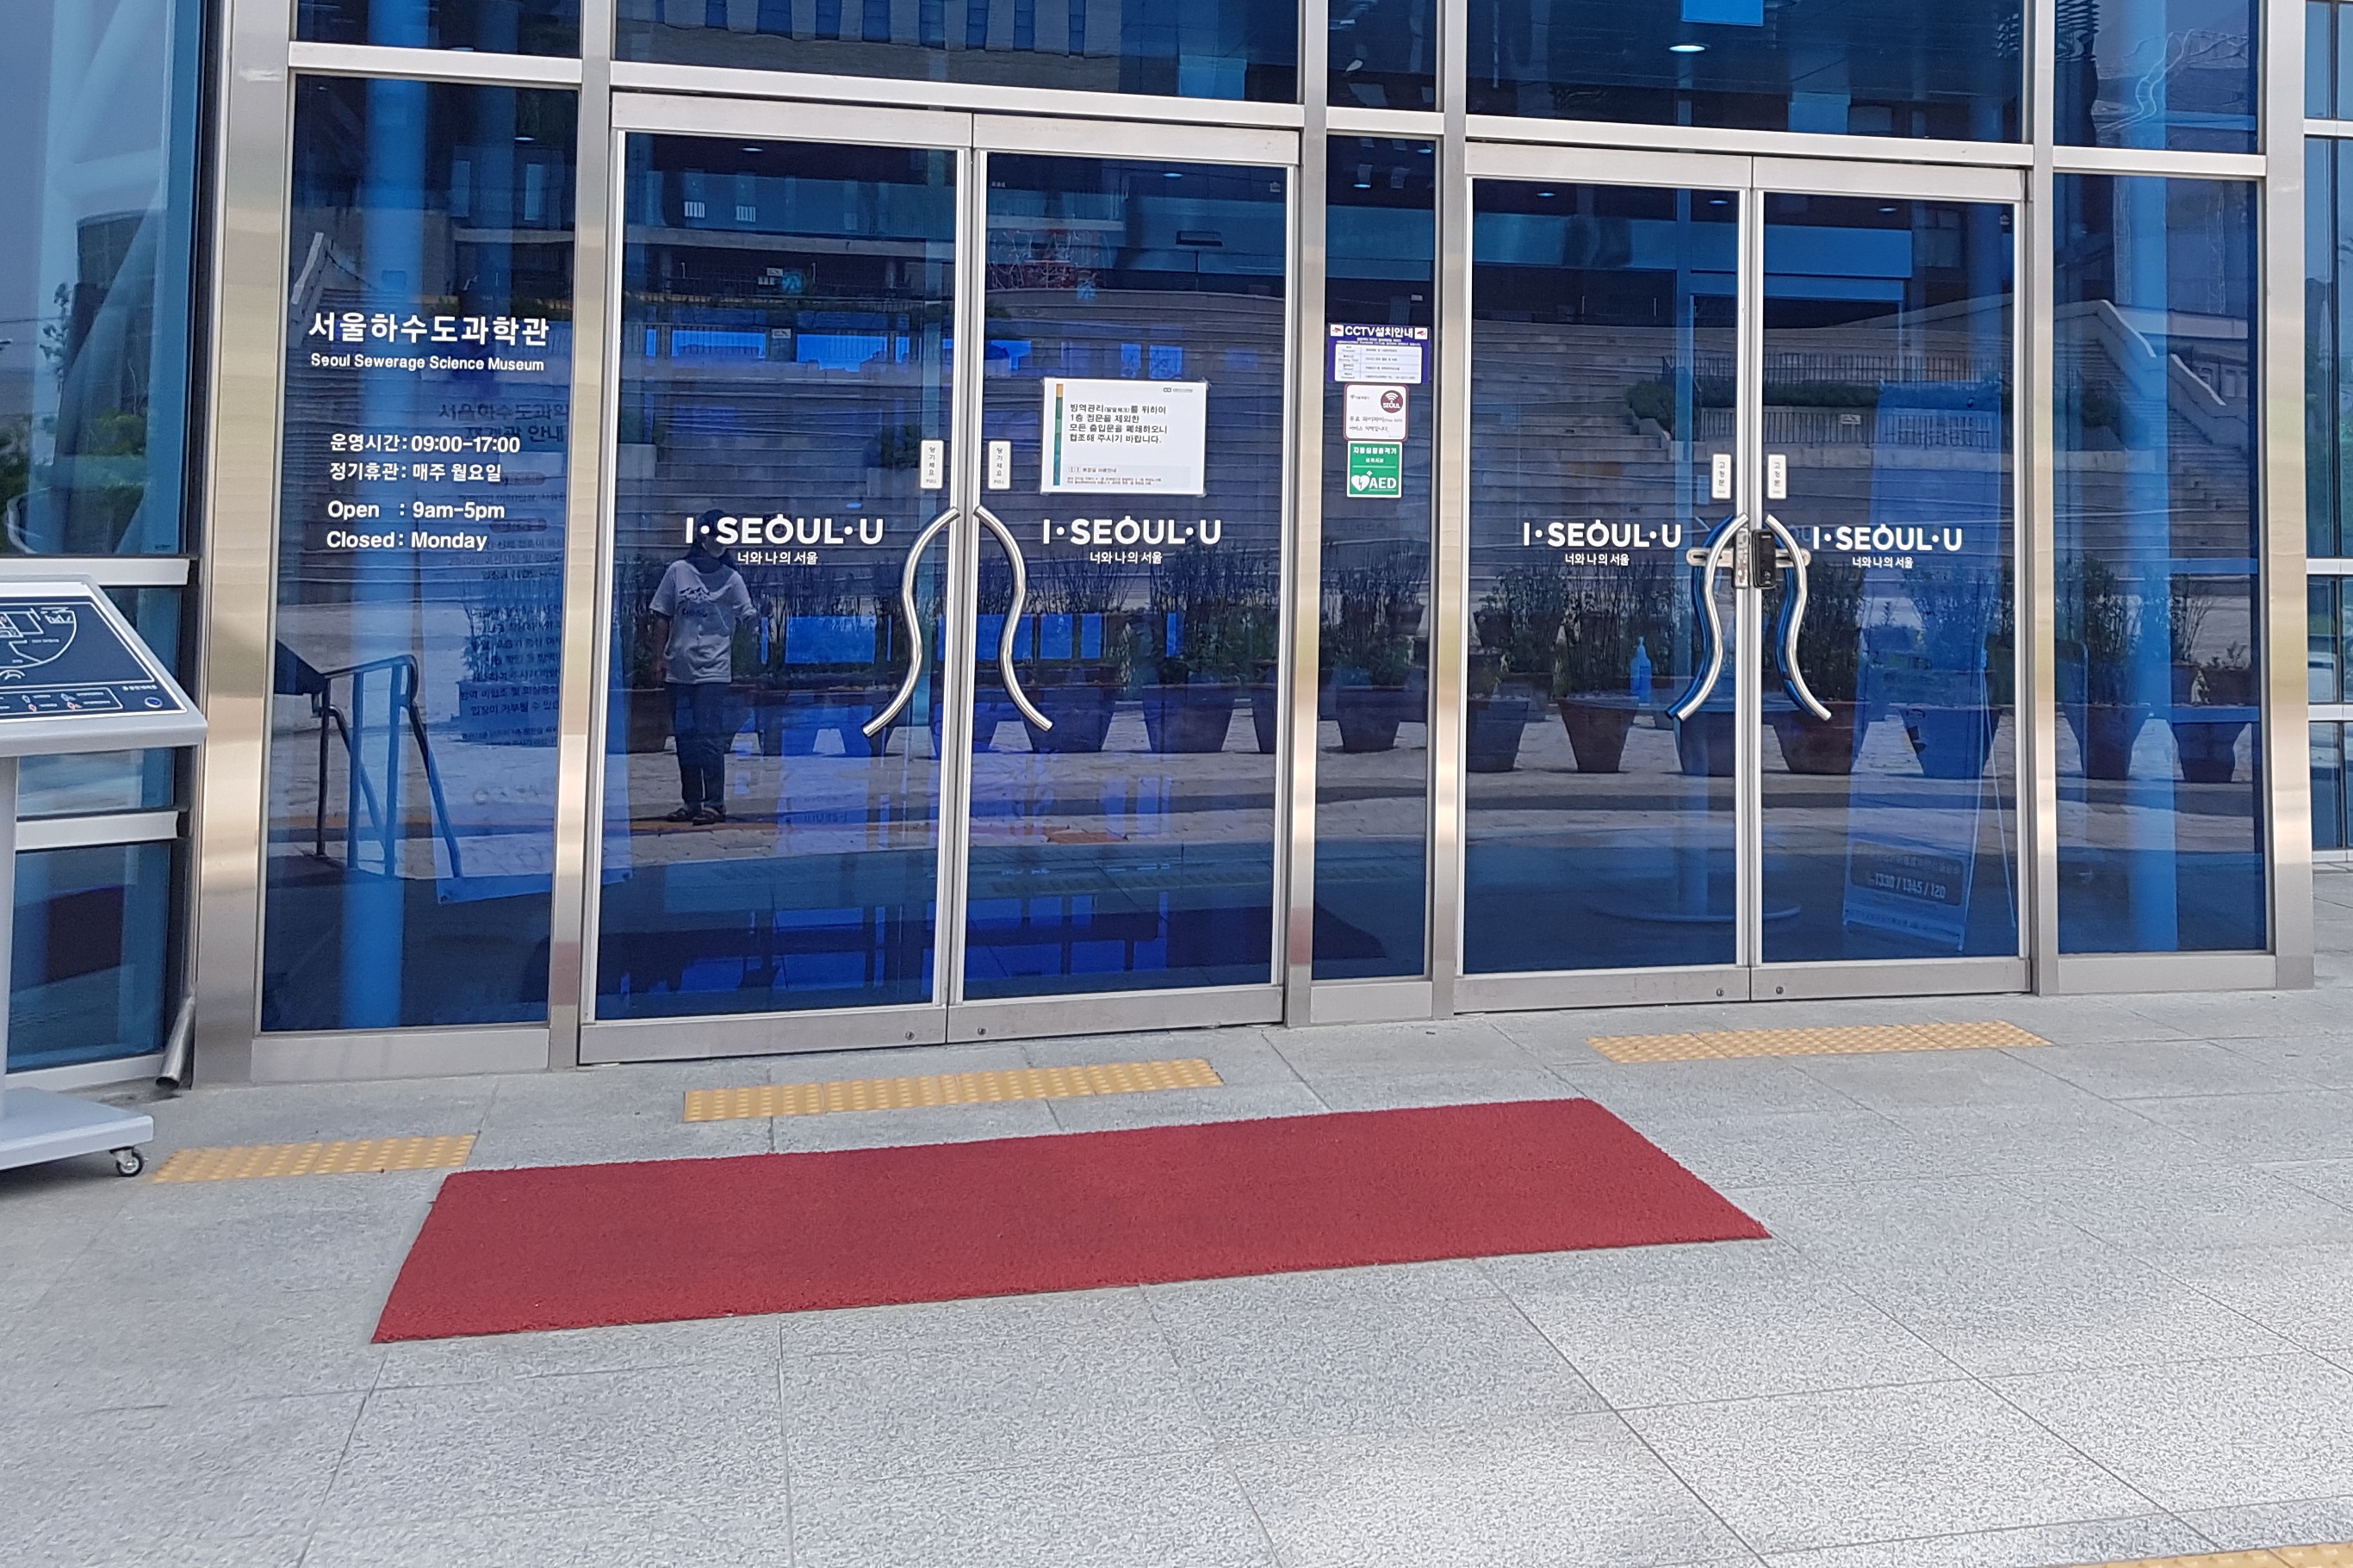 Entryway and Main entrance0 : Main entrance of Seoul Sewerage Science Museum